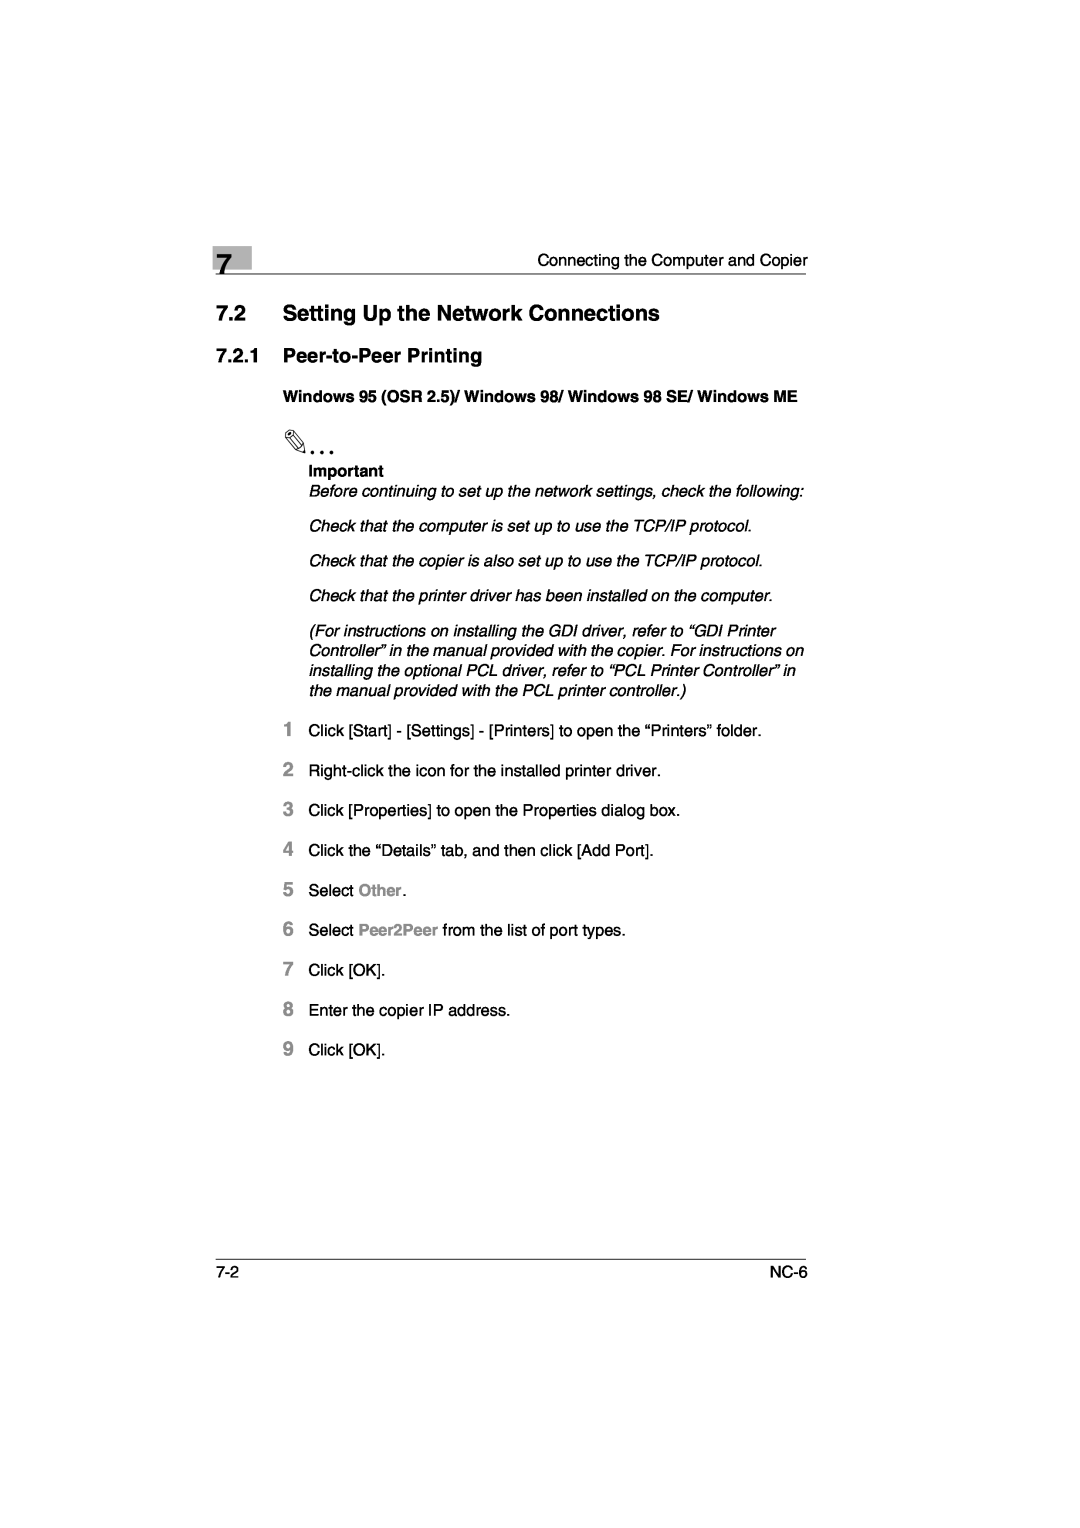 Konica Minolta NC-6 user manual Setting Up the Network Connections, Peer-to-Peer Printing 